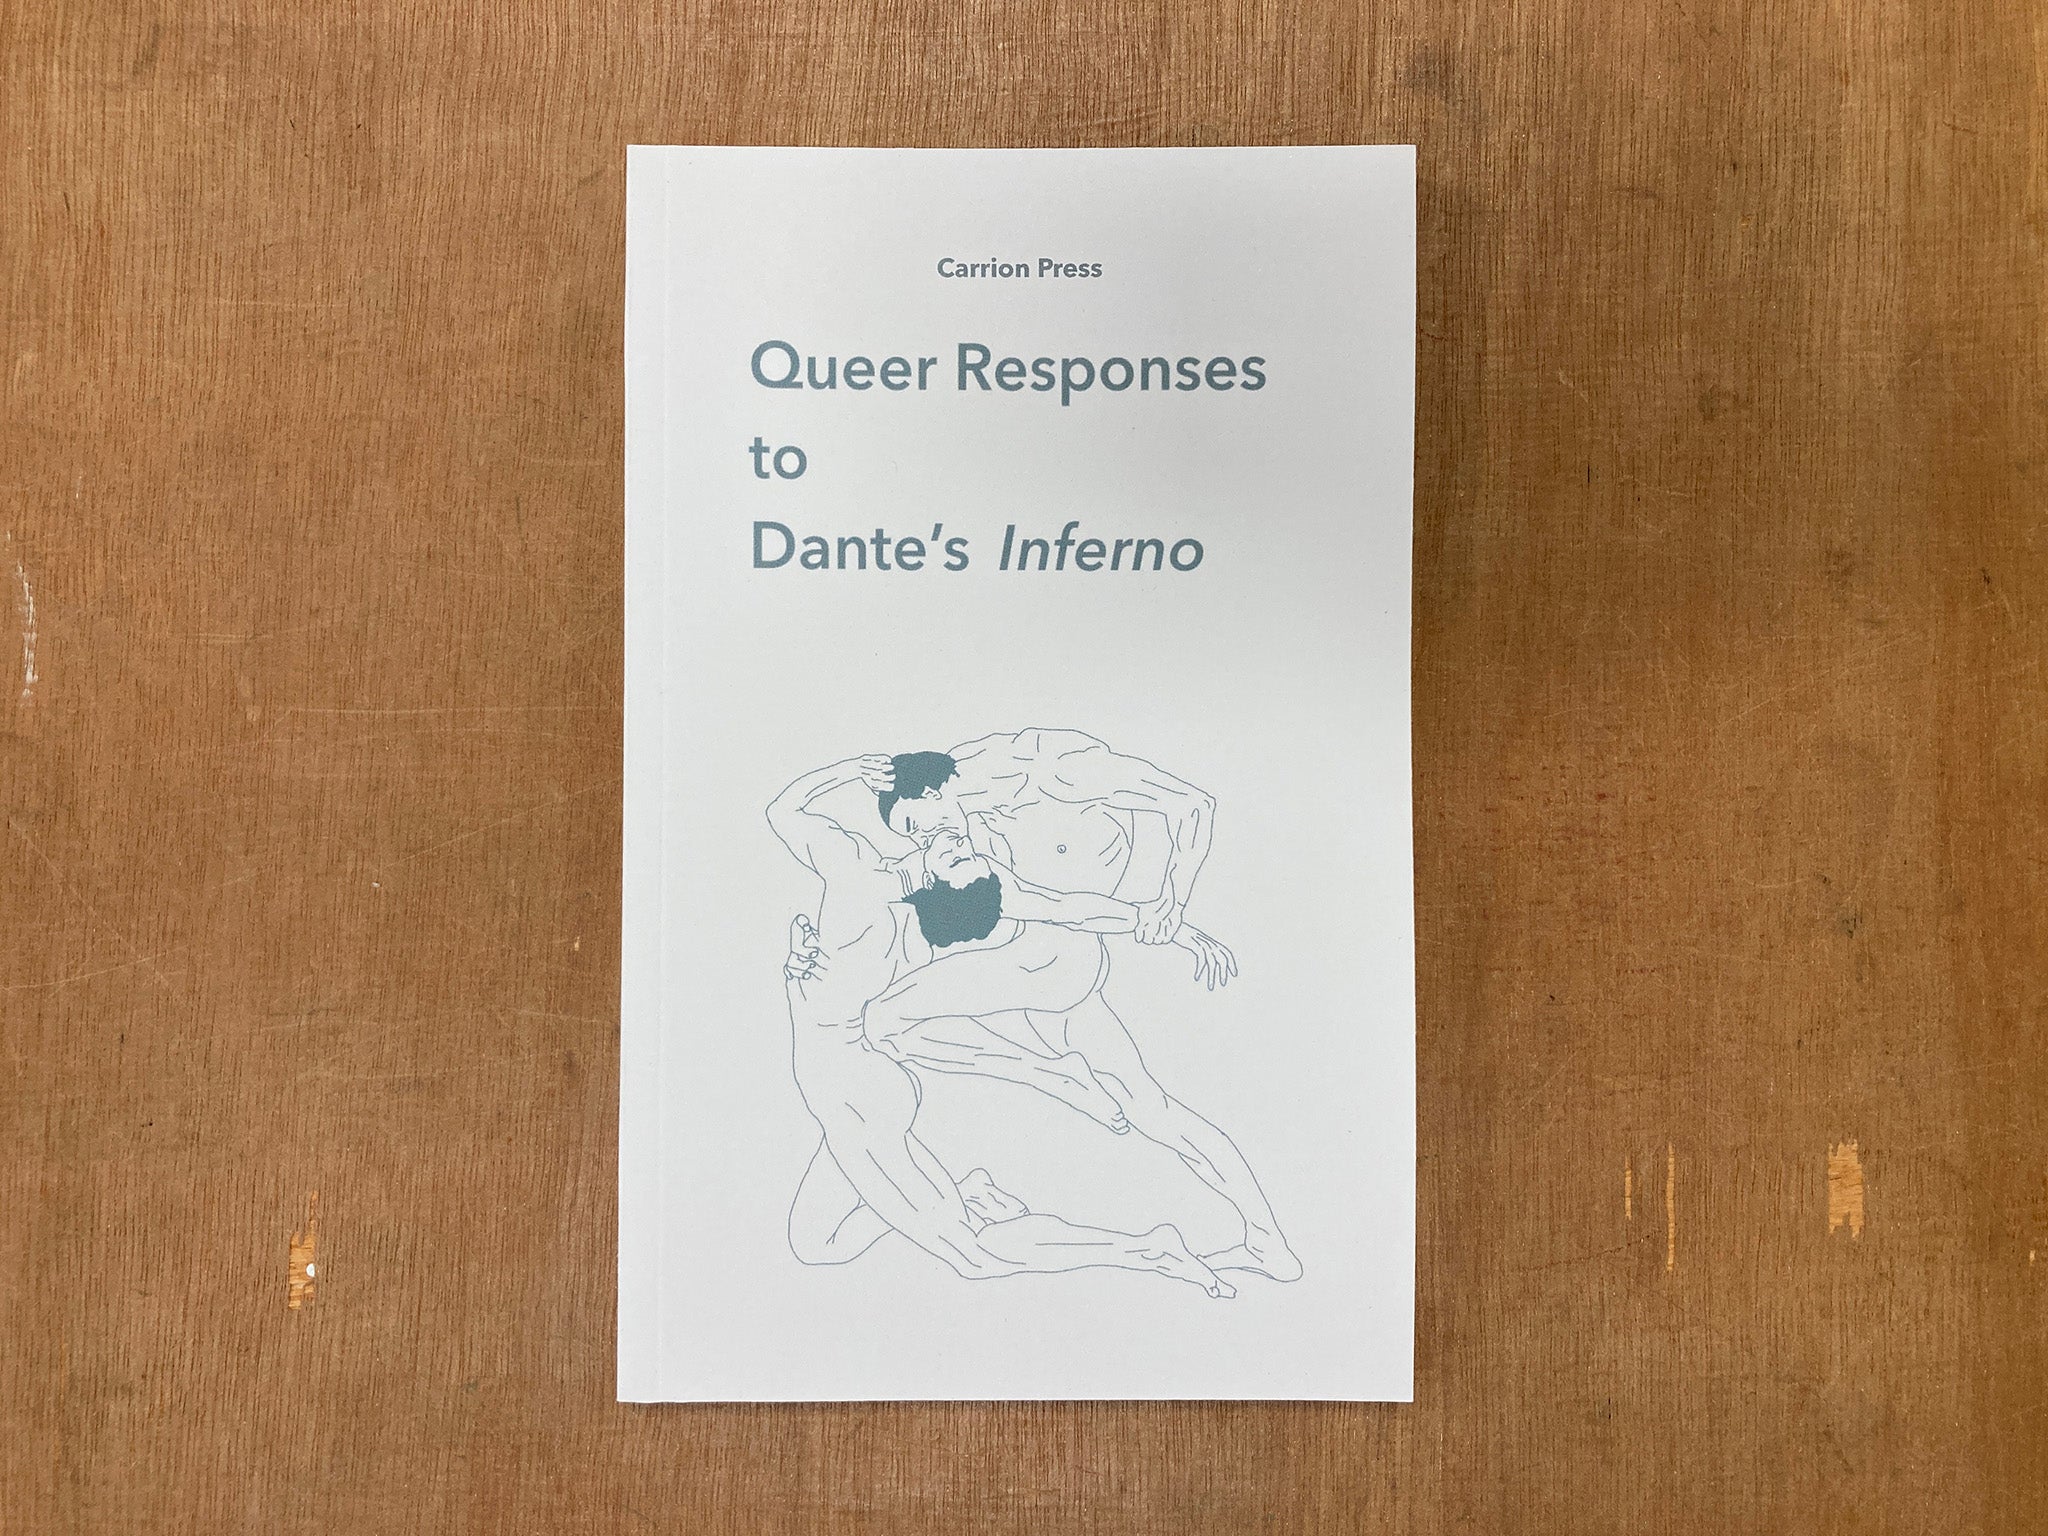 QUEER RESPONSES TO DANTE’S INFERNO